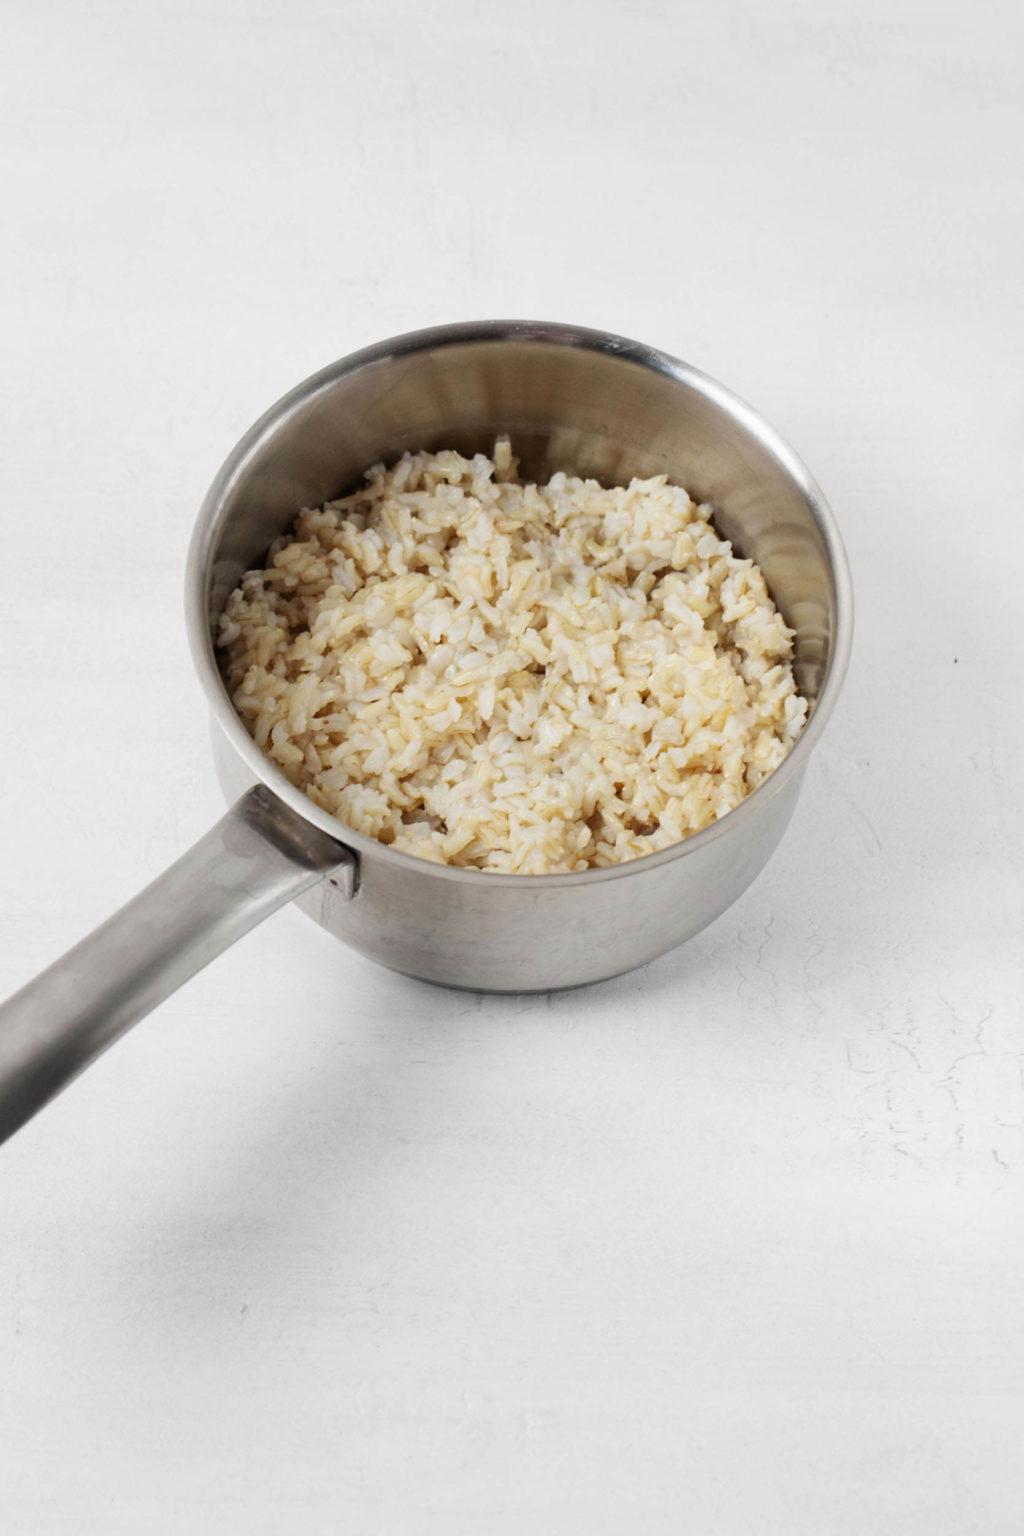 A small sauce pot is filled with brown rice.